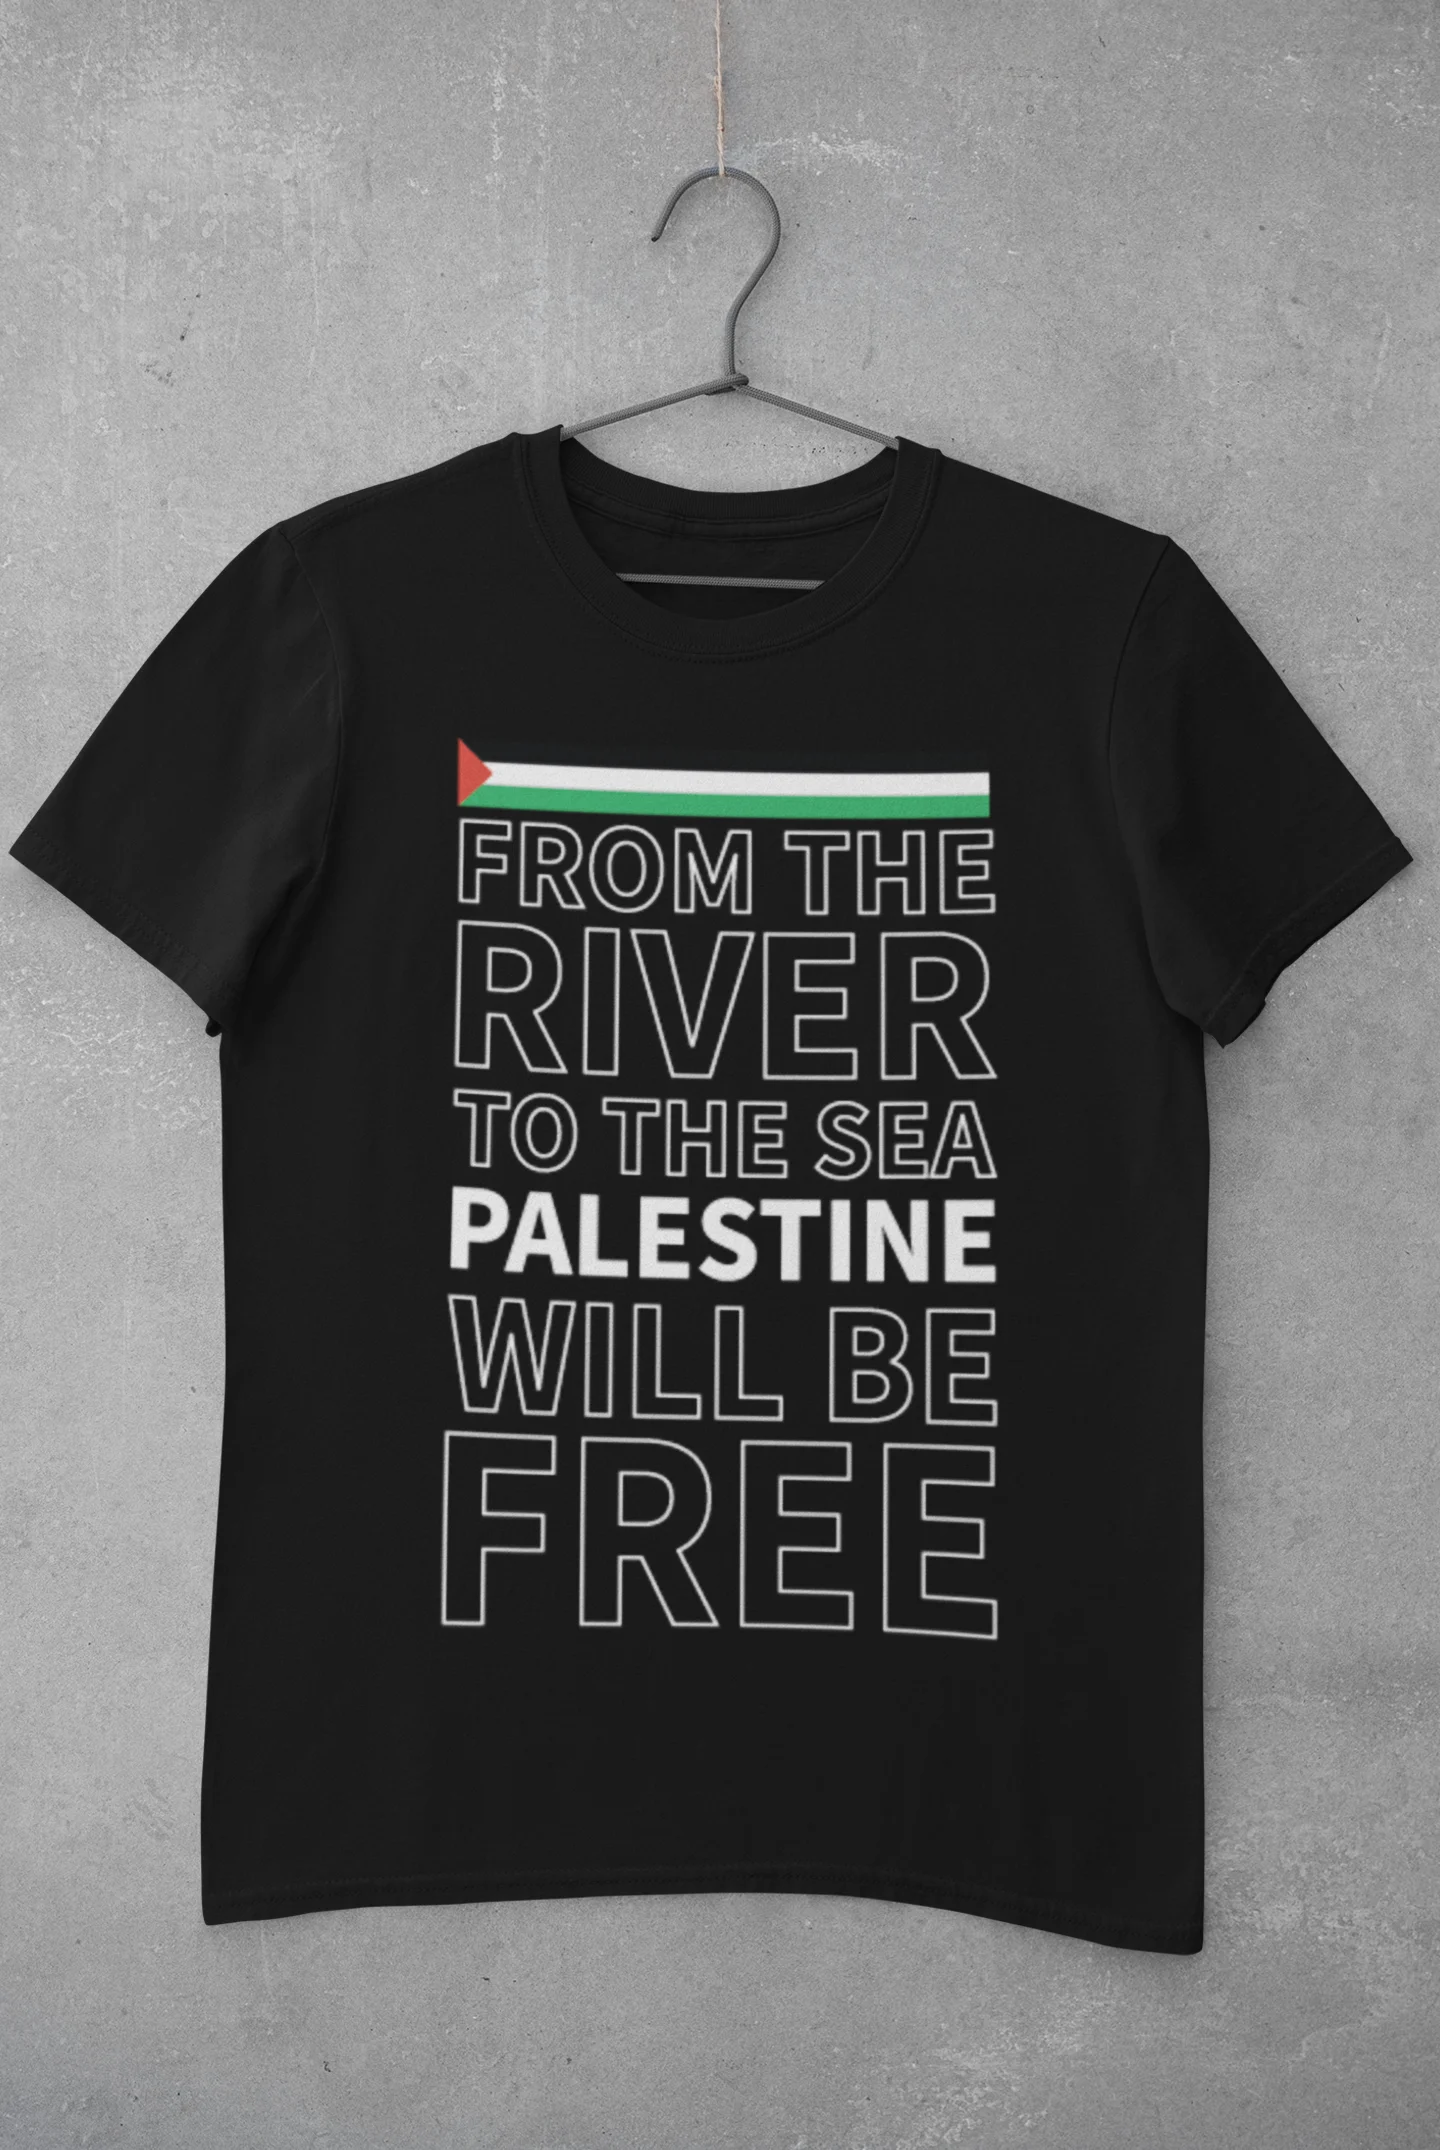 From the river to the sea palestine will be free